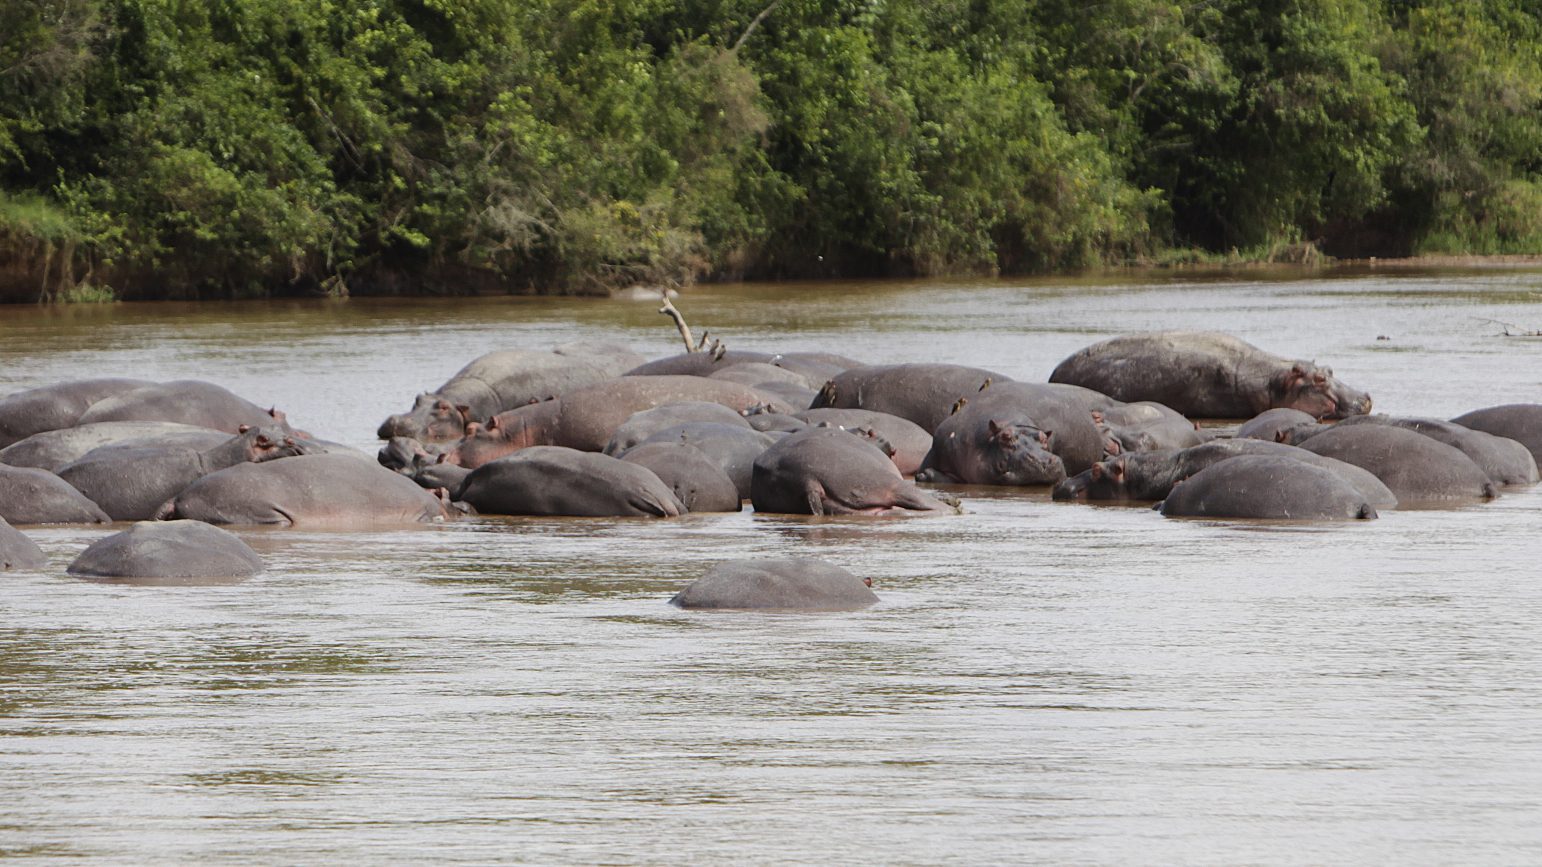 A group of hippopotami in the water taken by Marcel Hagmann